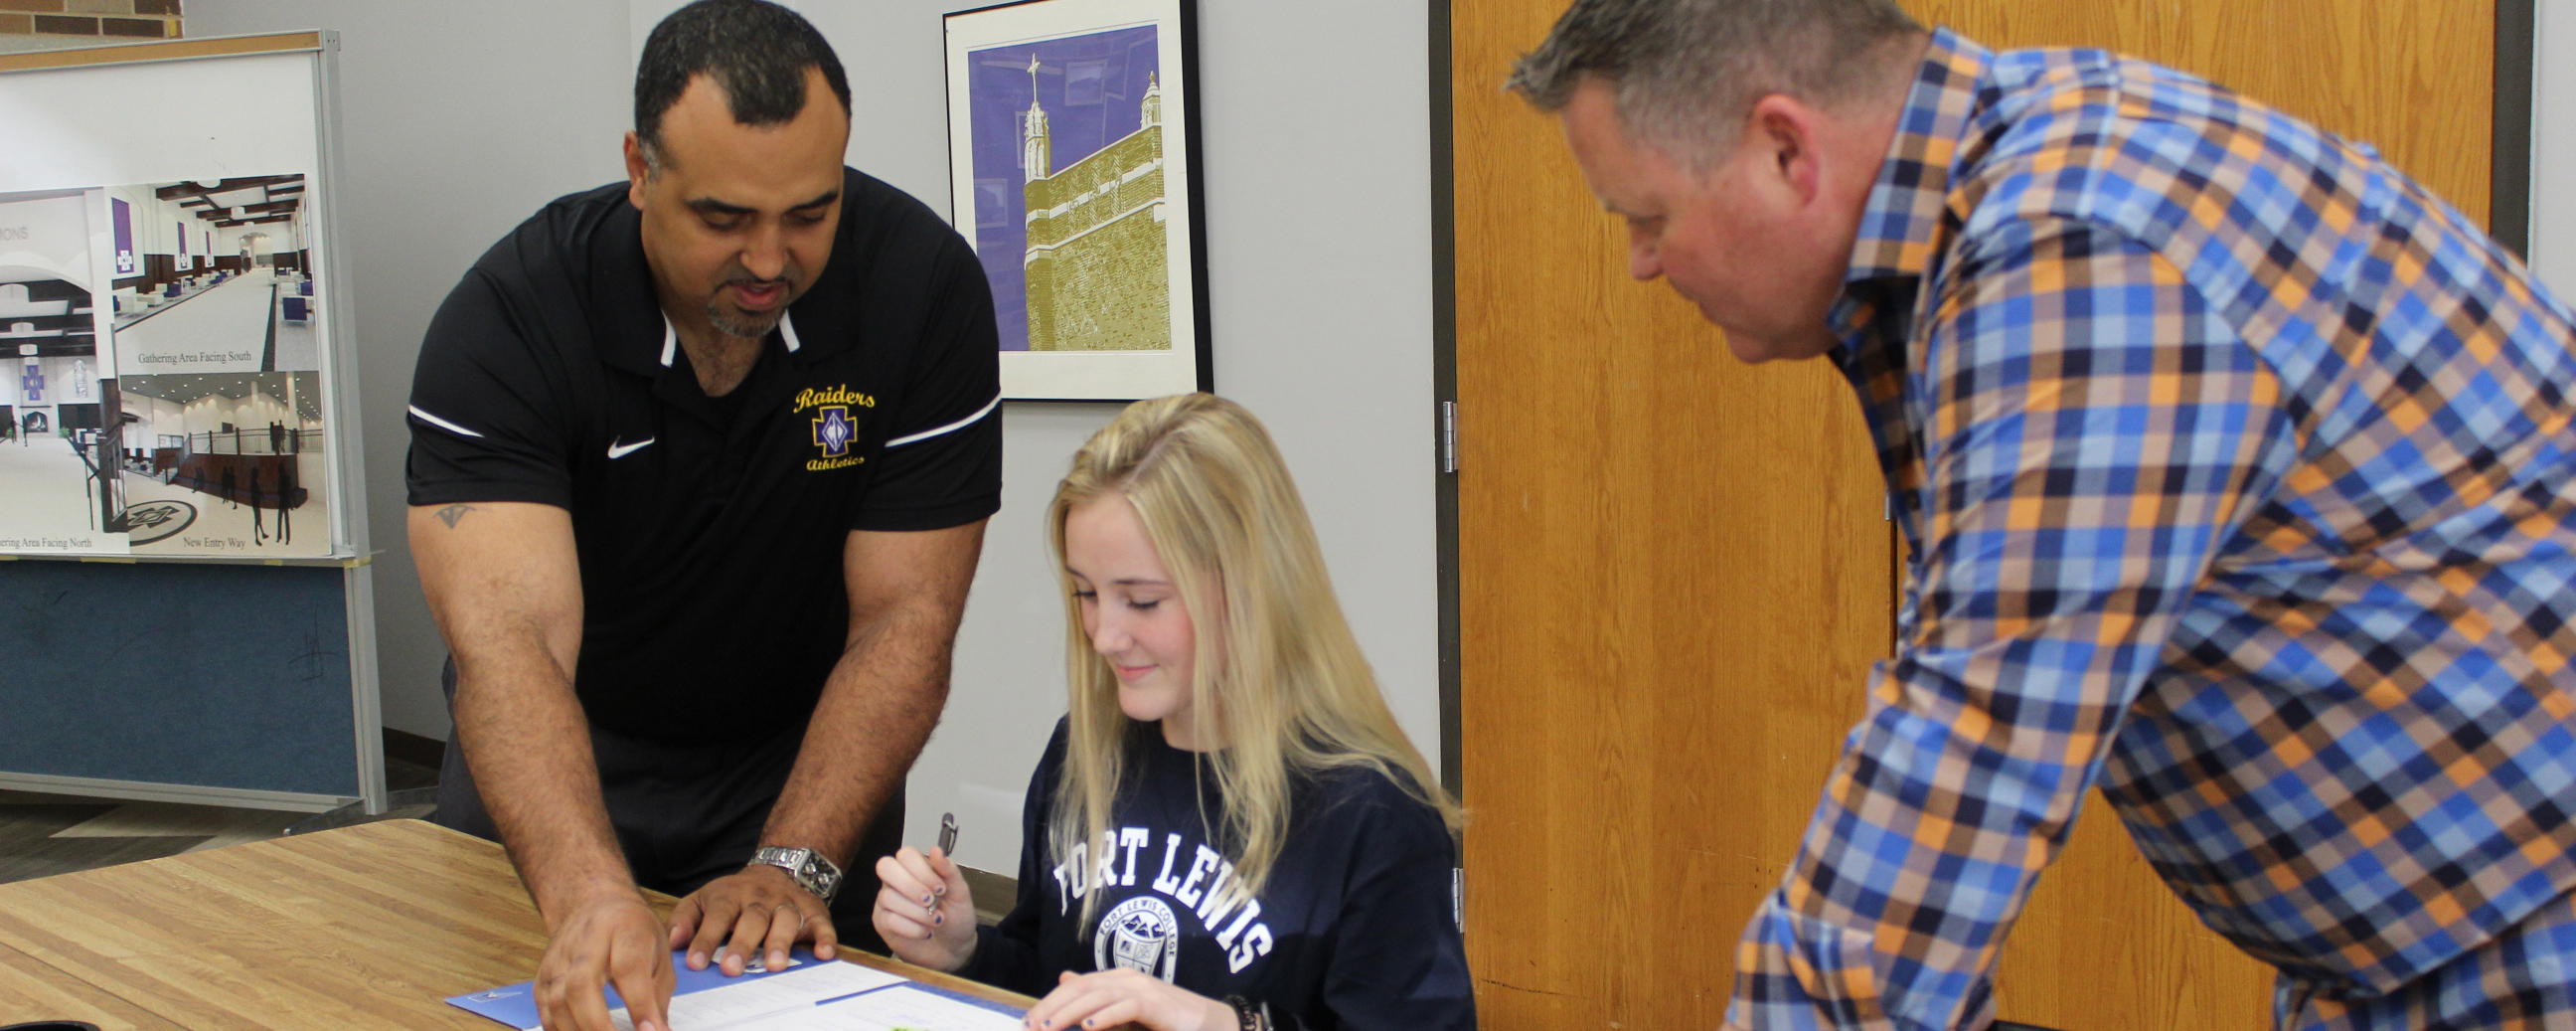 Olivia signs her contract with Athletic Director Phil Archer and her father looking on.